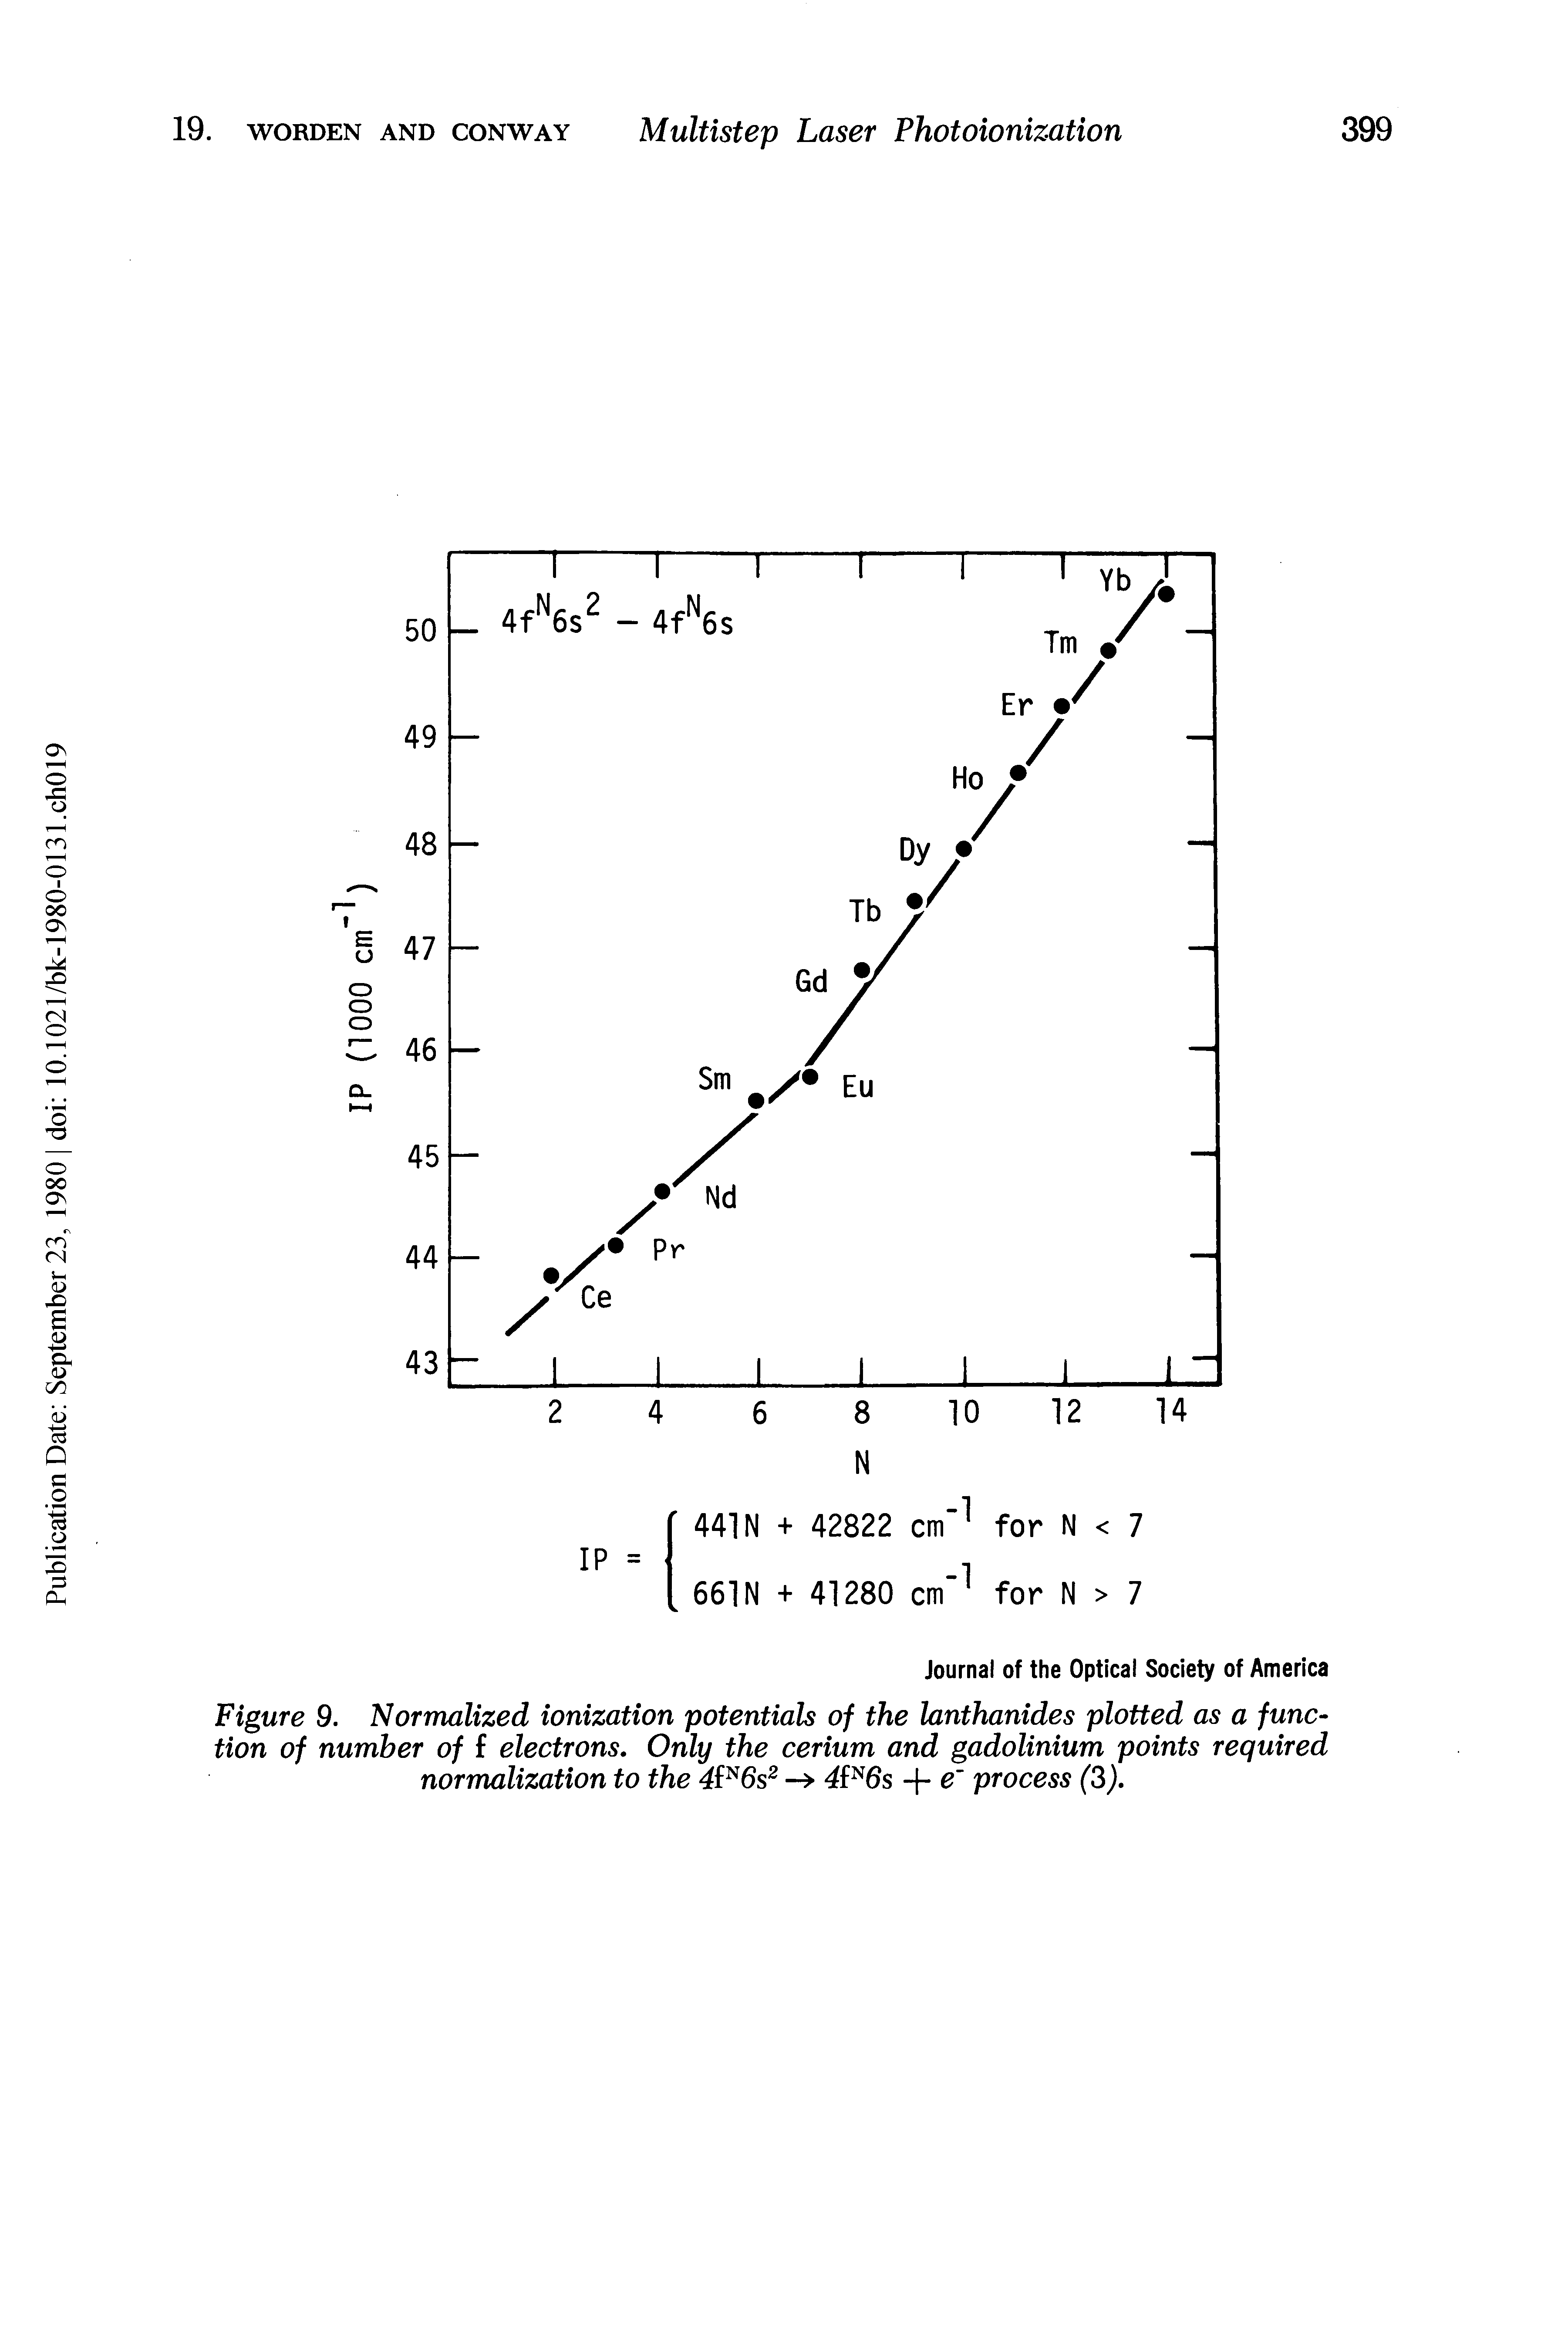 Figure 9. Normalized ionization potentials of the lanthanides plotted as a function of number of f electrons. Only the cerium and gadolinium points required normalization to the 4P6s2 4fN6s + e process (3).